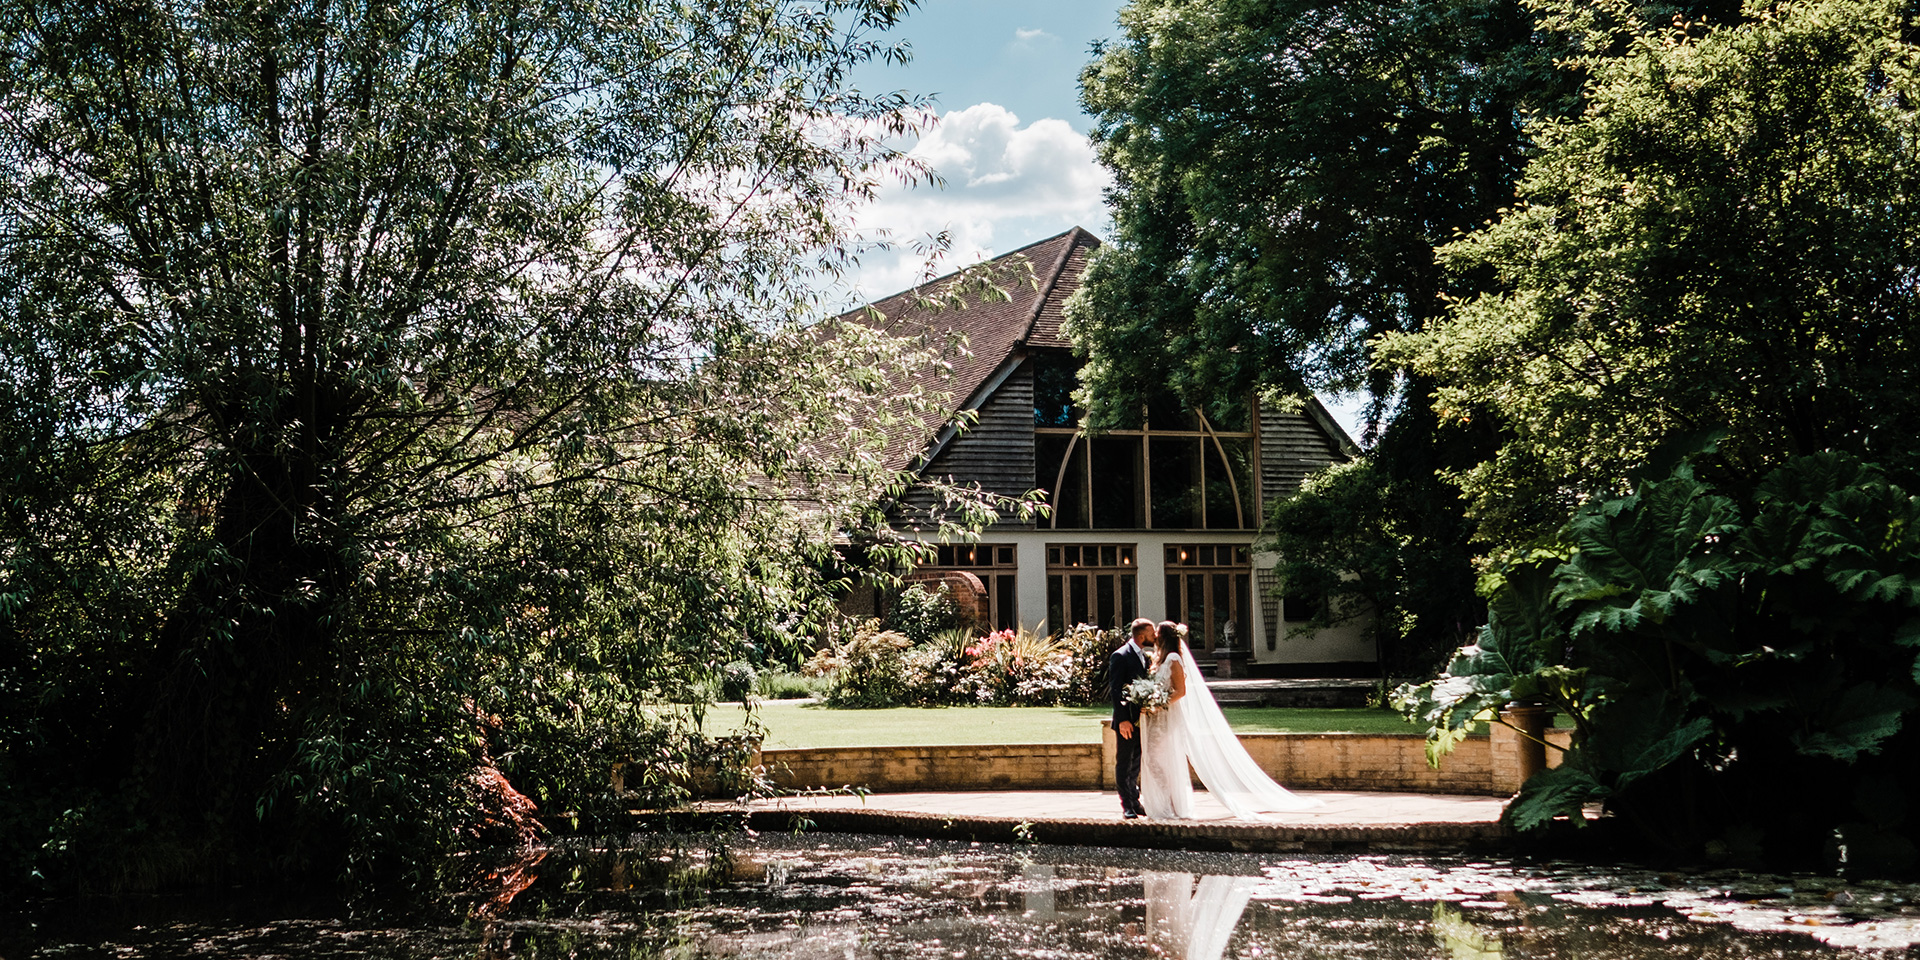 Take a look at these 11 reasons to have a romantic barn wedding in 2020